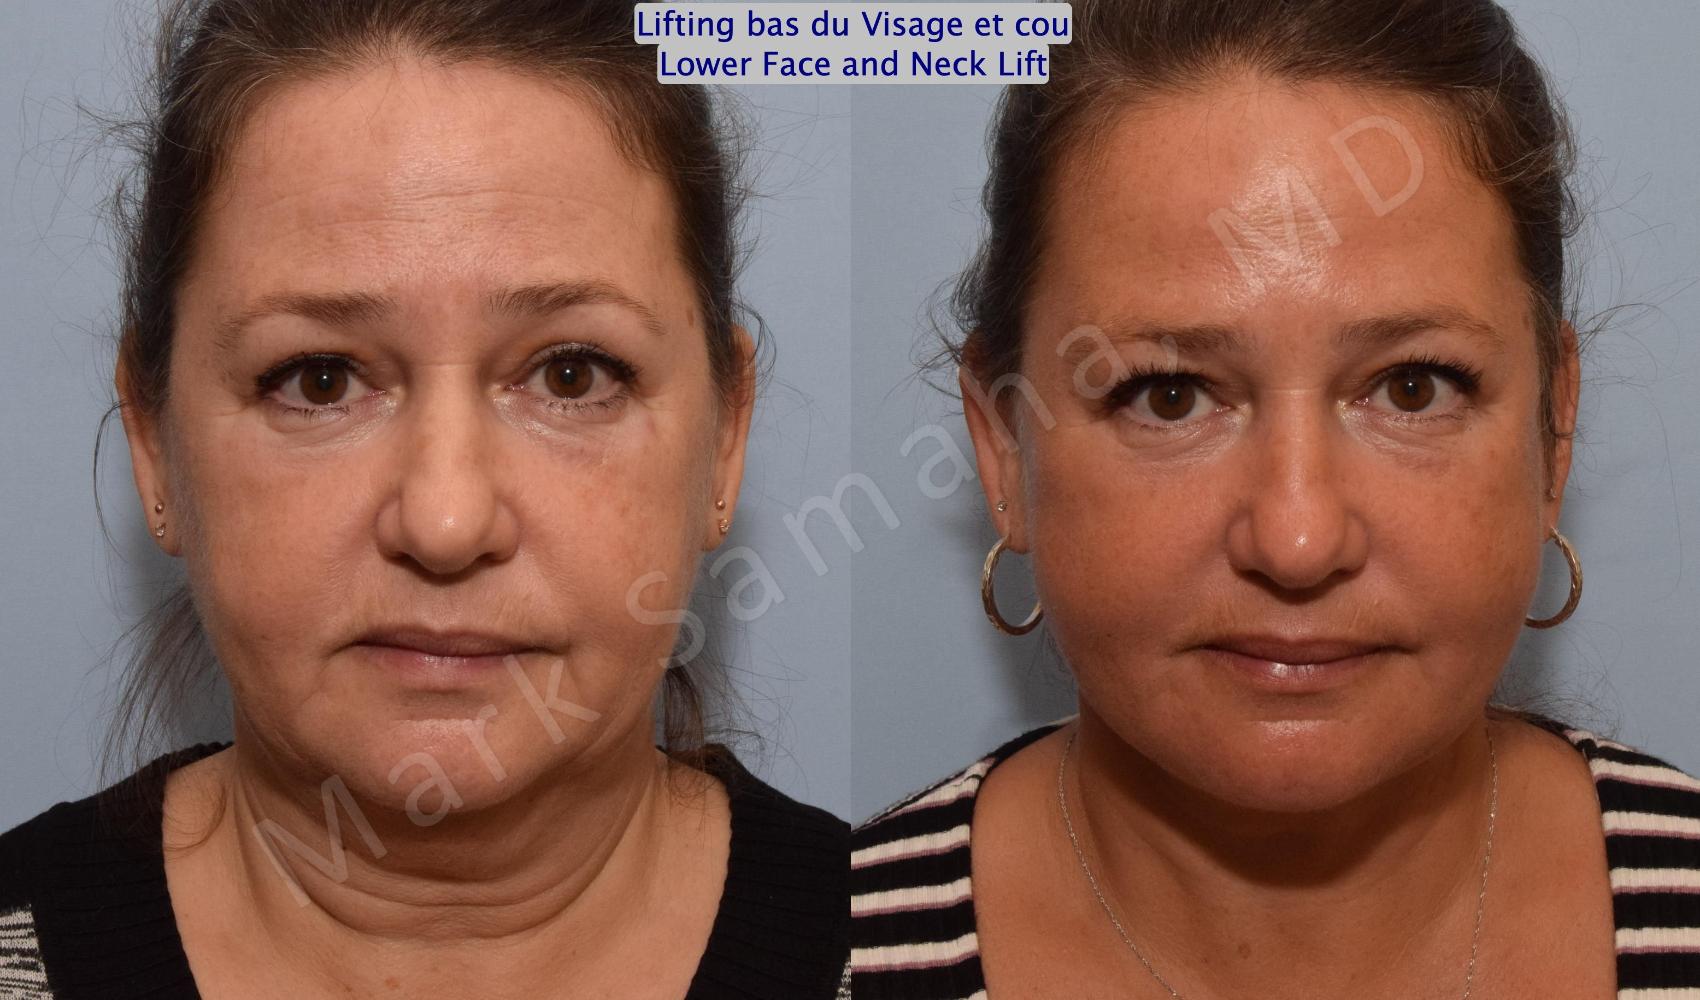 Before & After Lifting du visage / Cou - Facelift / Necklift Case 150 Front View in Montreal, QC